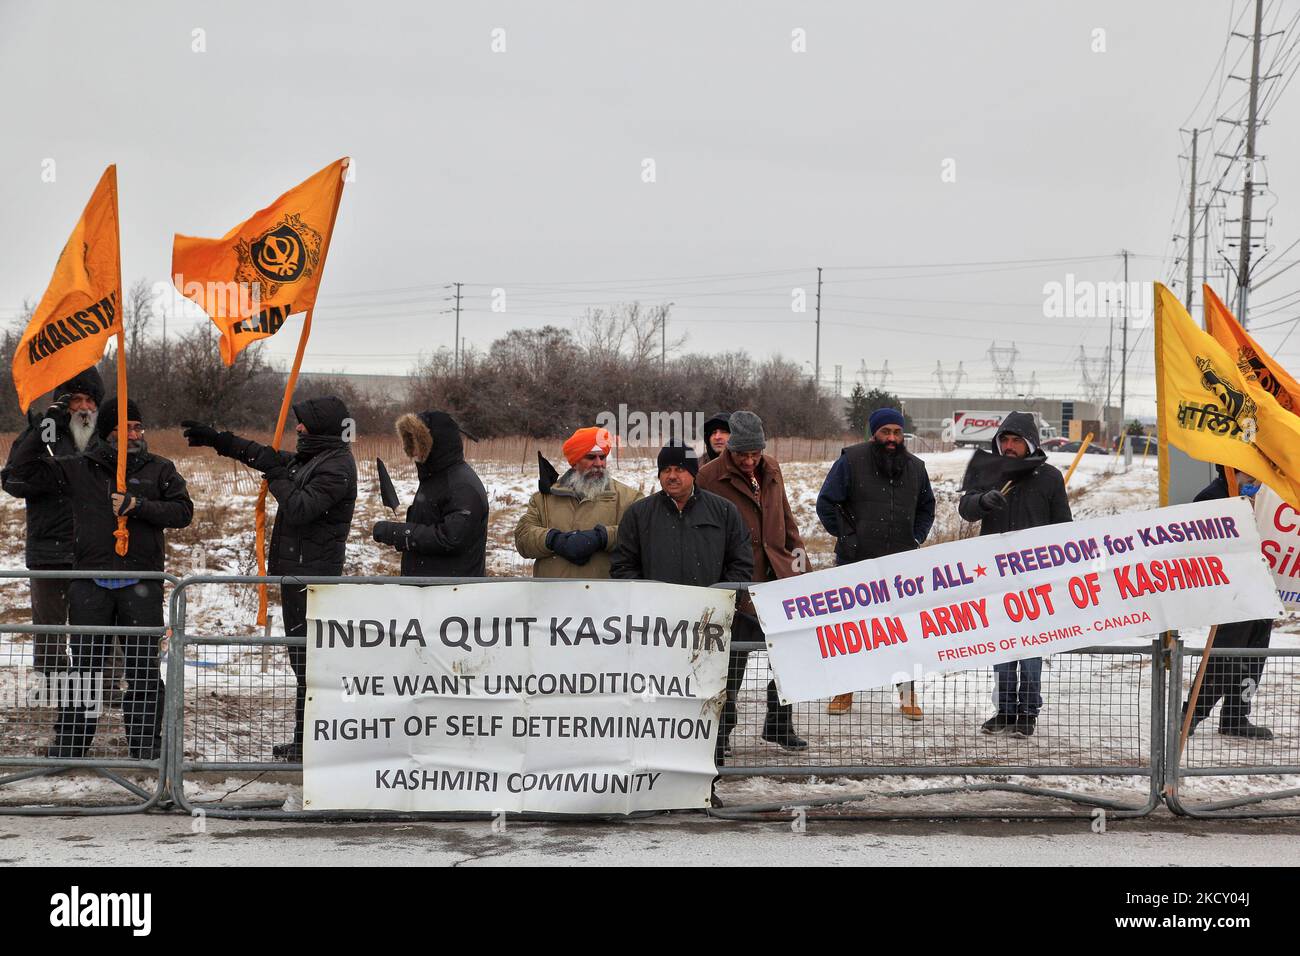 February 01, 2015 --- Mississauga, Ontario, Canada --- Canadian Pro-Khalistan Sikhs protesting against the Indian government and calling for a separate Sikh state as well as showing their disapproval for the Indian army's presence in Indian-controlled Kashmir. A large group of Sikhs assembled outside a venue where celebrations for India's 66th Republic Day were taking place to show their discontent with the Indian government. The Khalistan movement seeks to create a separate Sikh state, called Khalistan in the Punjab region of India and has been a controversial topic. As well the issue of Kash Stock Photo